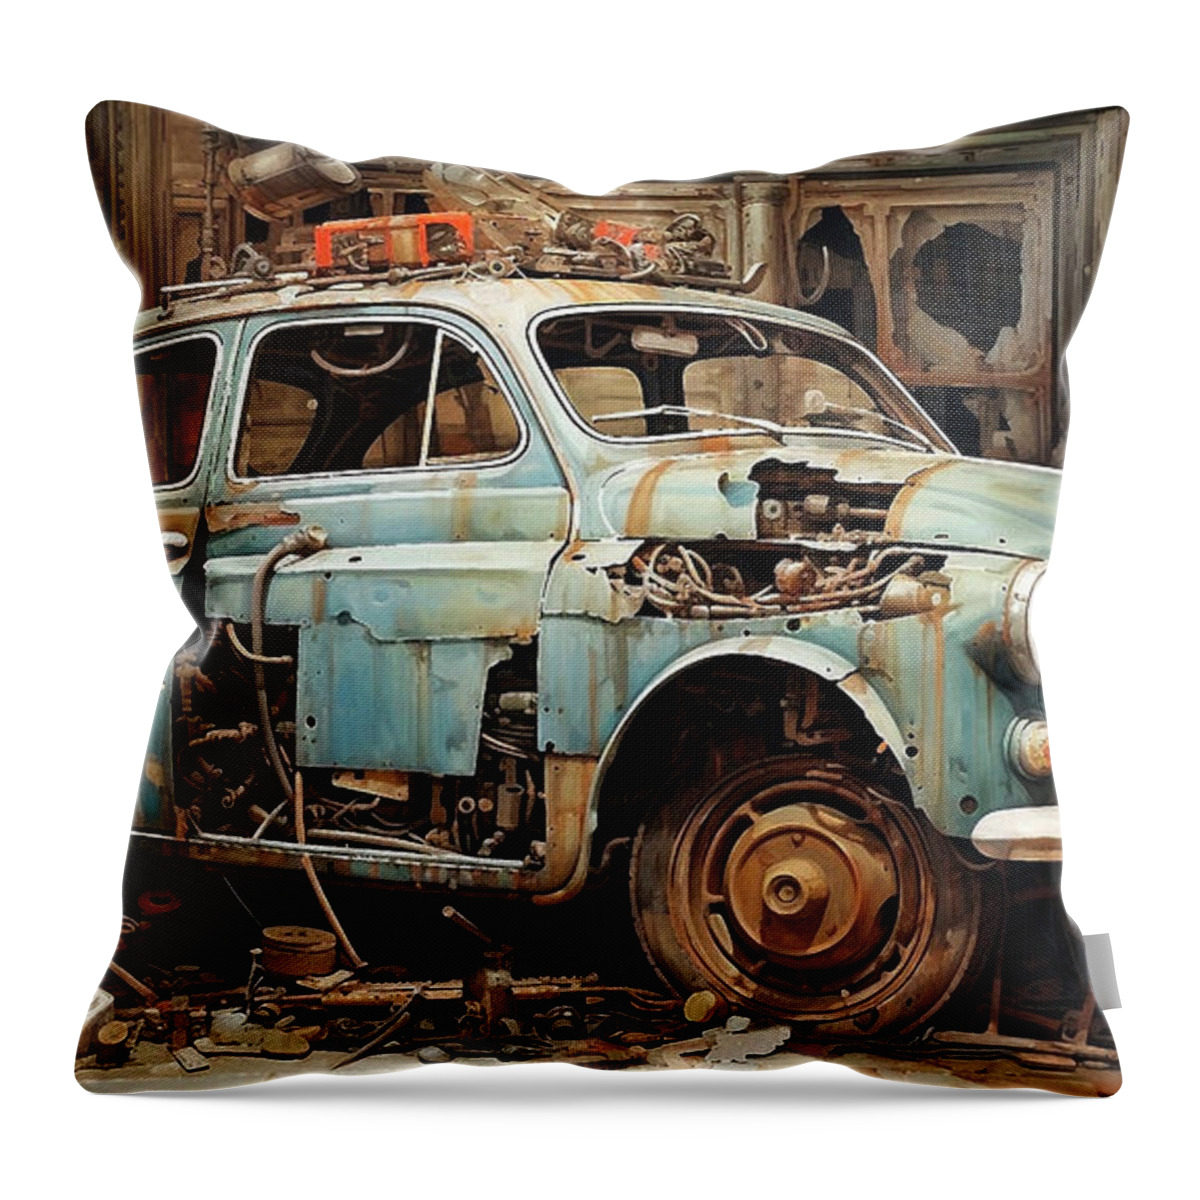 Fiat Throw Pillow featuring the drawing Car 2301 Fiat 500 by Clark Leffler